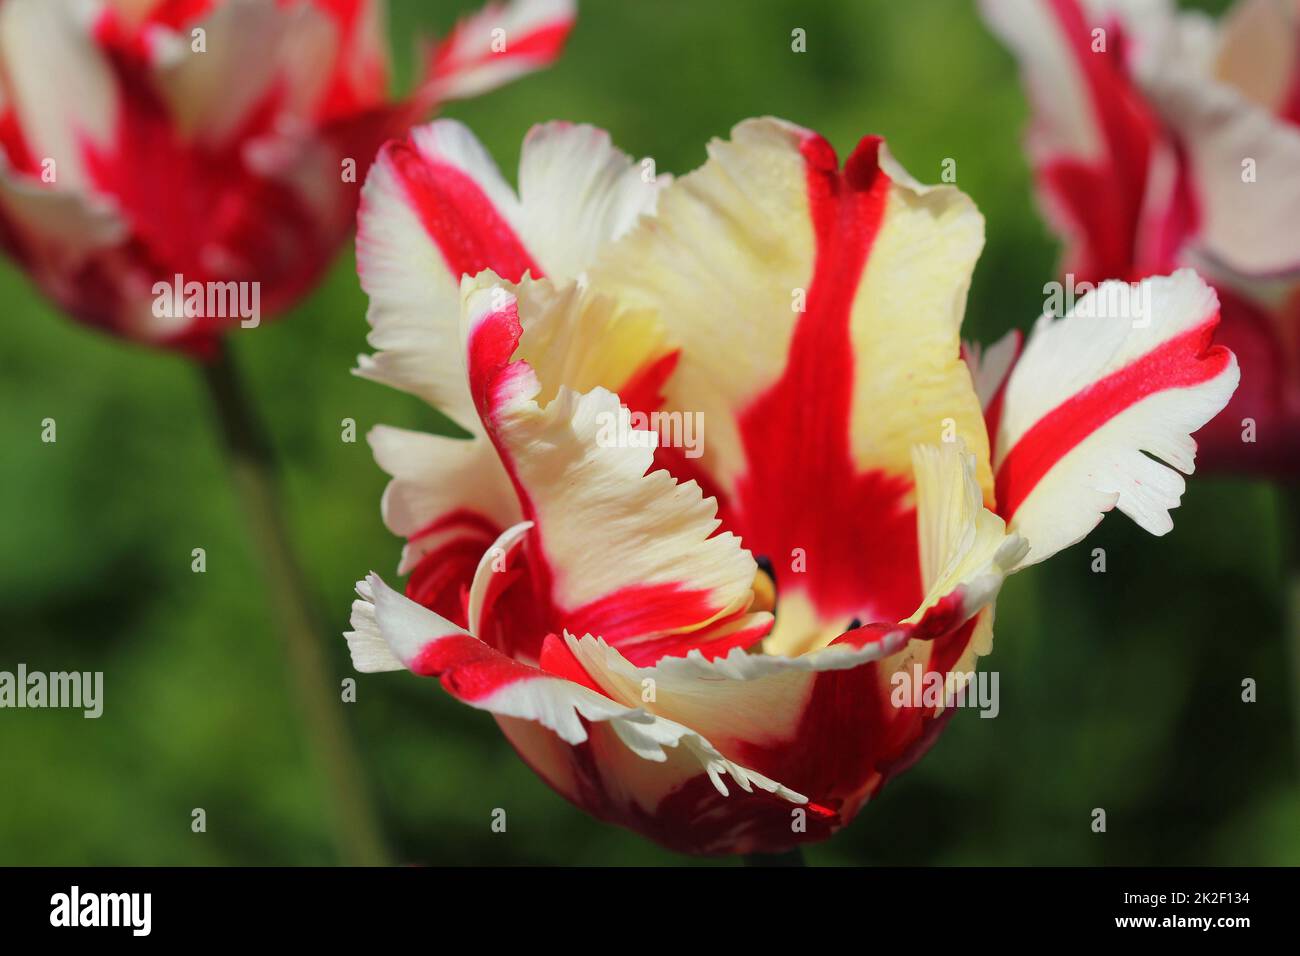 White tulip with red delicate stripes. Nature beauty in the garden. Stock Photo